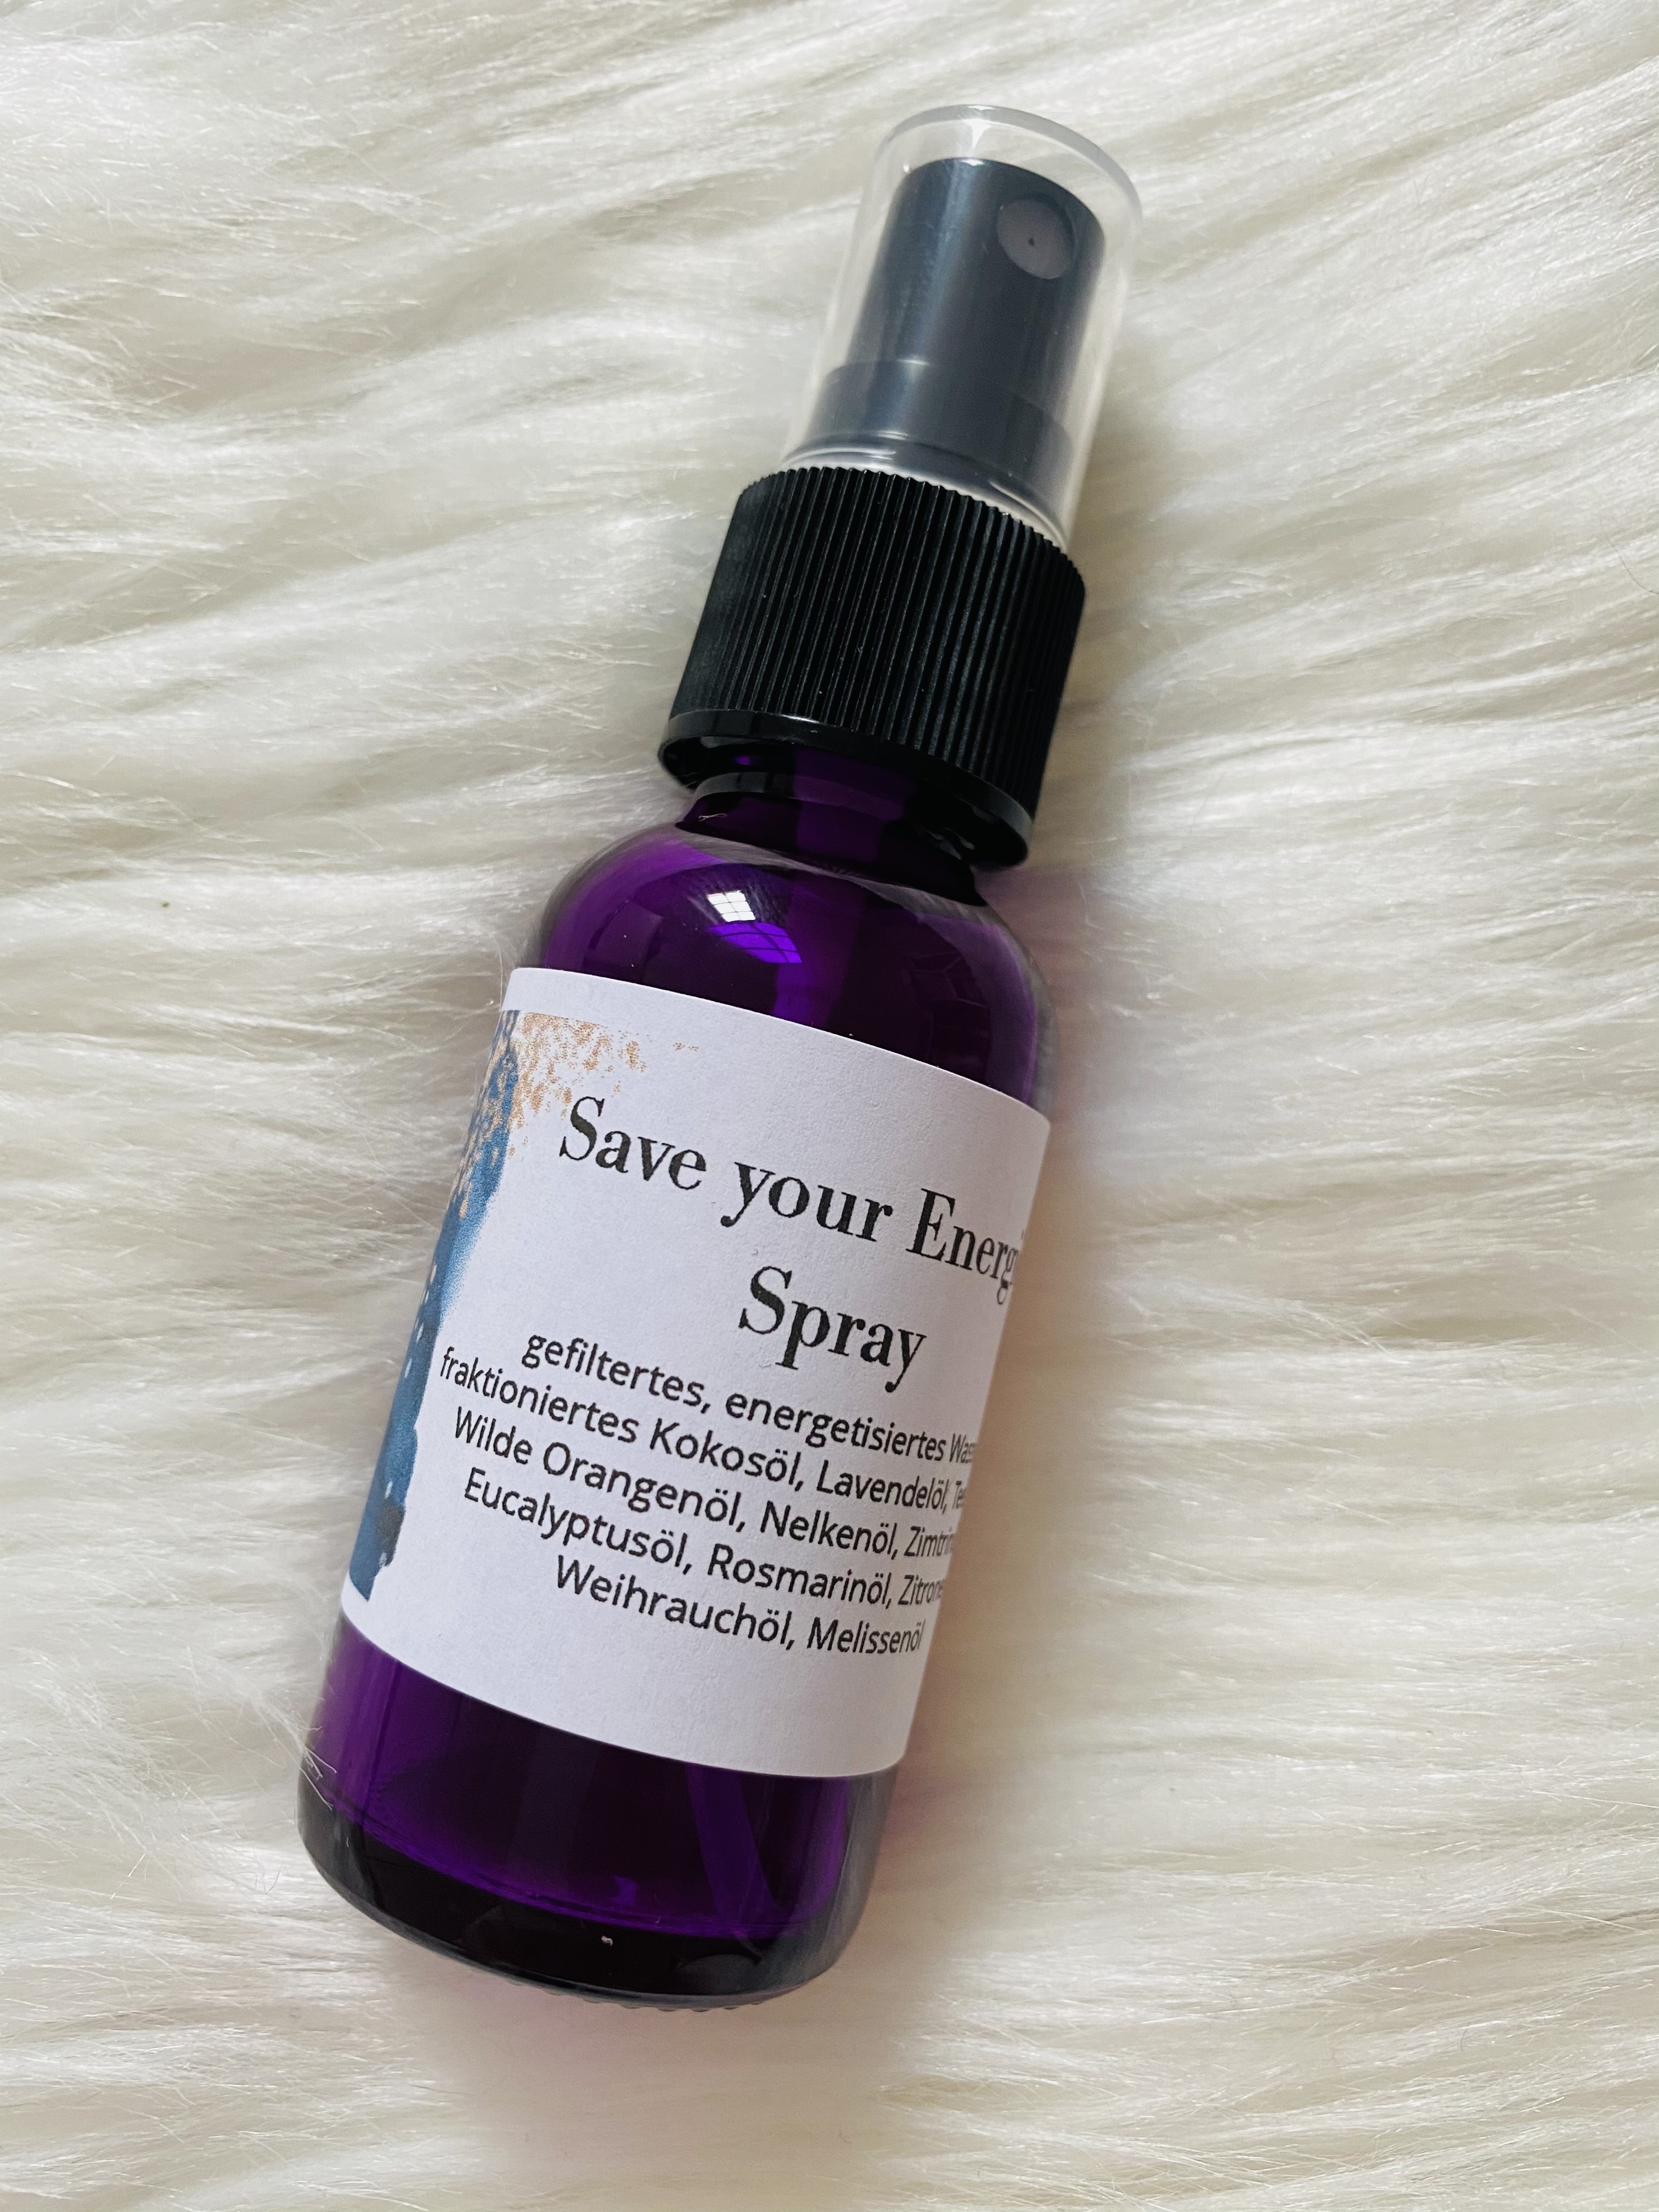 Save your Energie Spray